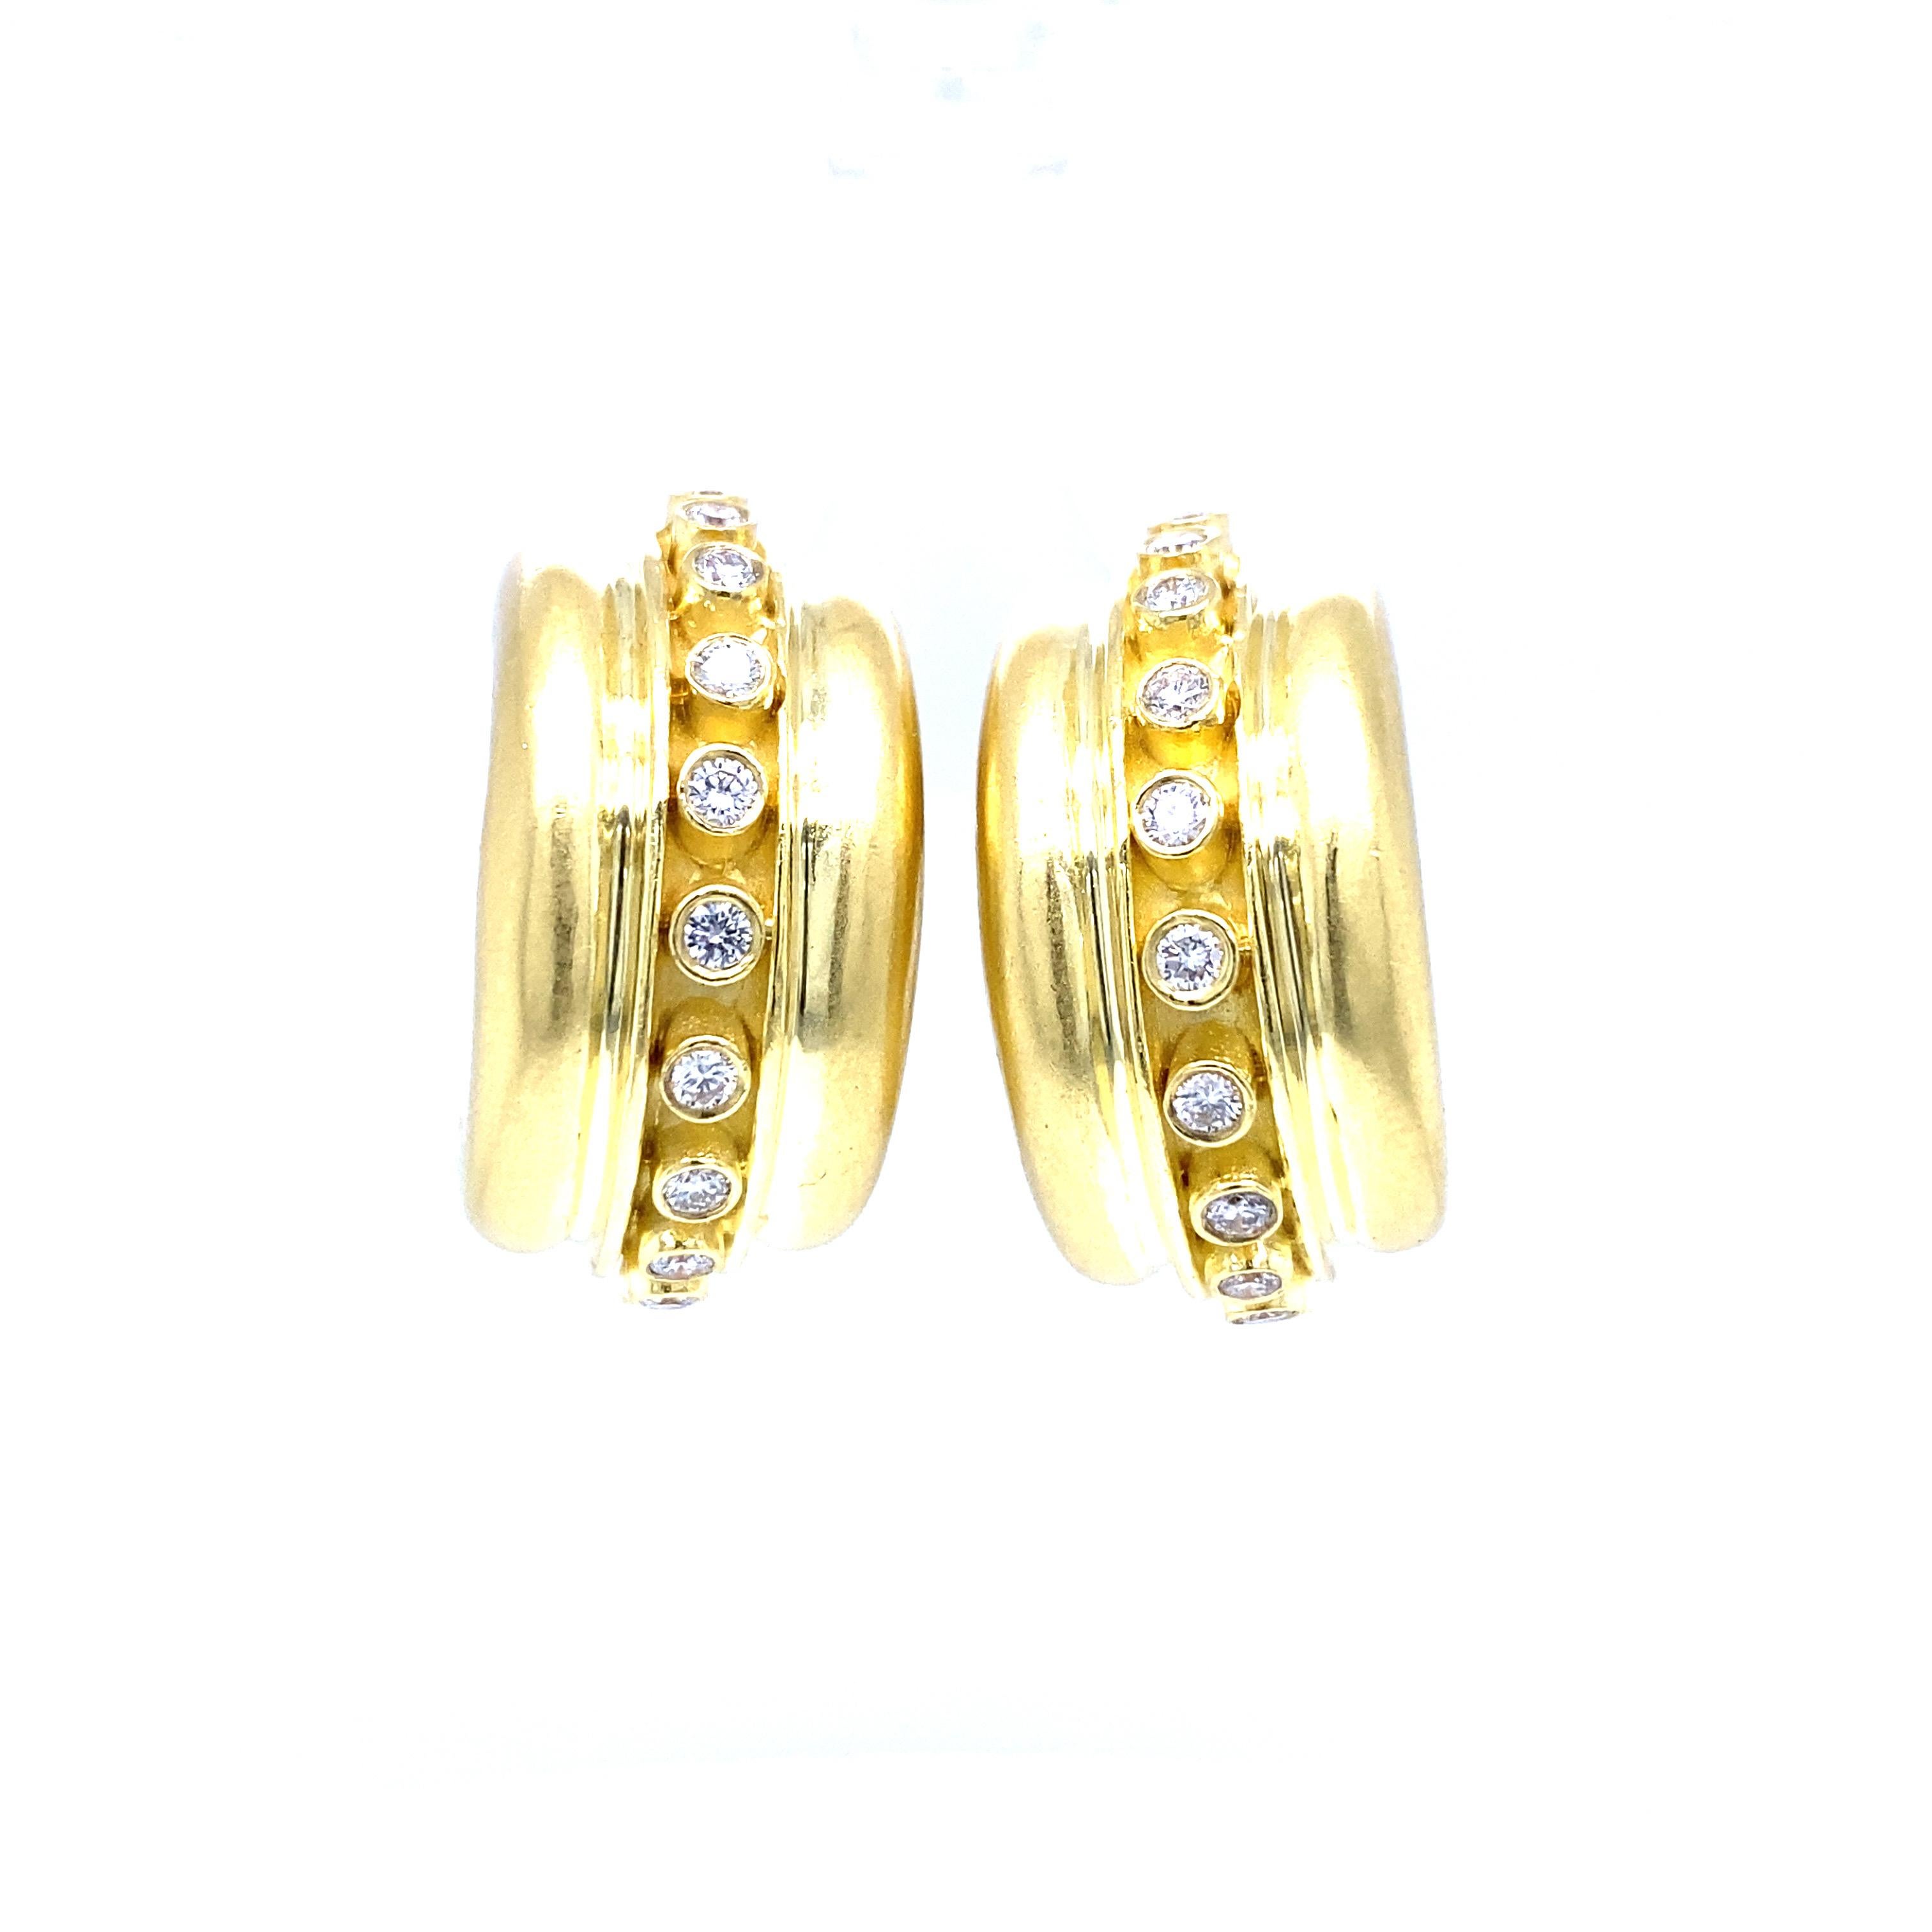 Marlene Stowe Bezel Diamond Hoop Earrings in 18K Yellow Gold.  (22) Round Brilliant Cut Diamonds weighing 0.88 carat total weight, G-H in color and VS in clarity are expertly set.  The Earrings measure 1 inch in length and 1/2 inch in width.  26.22